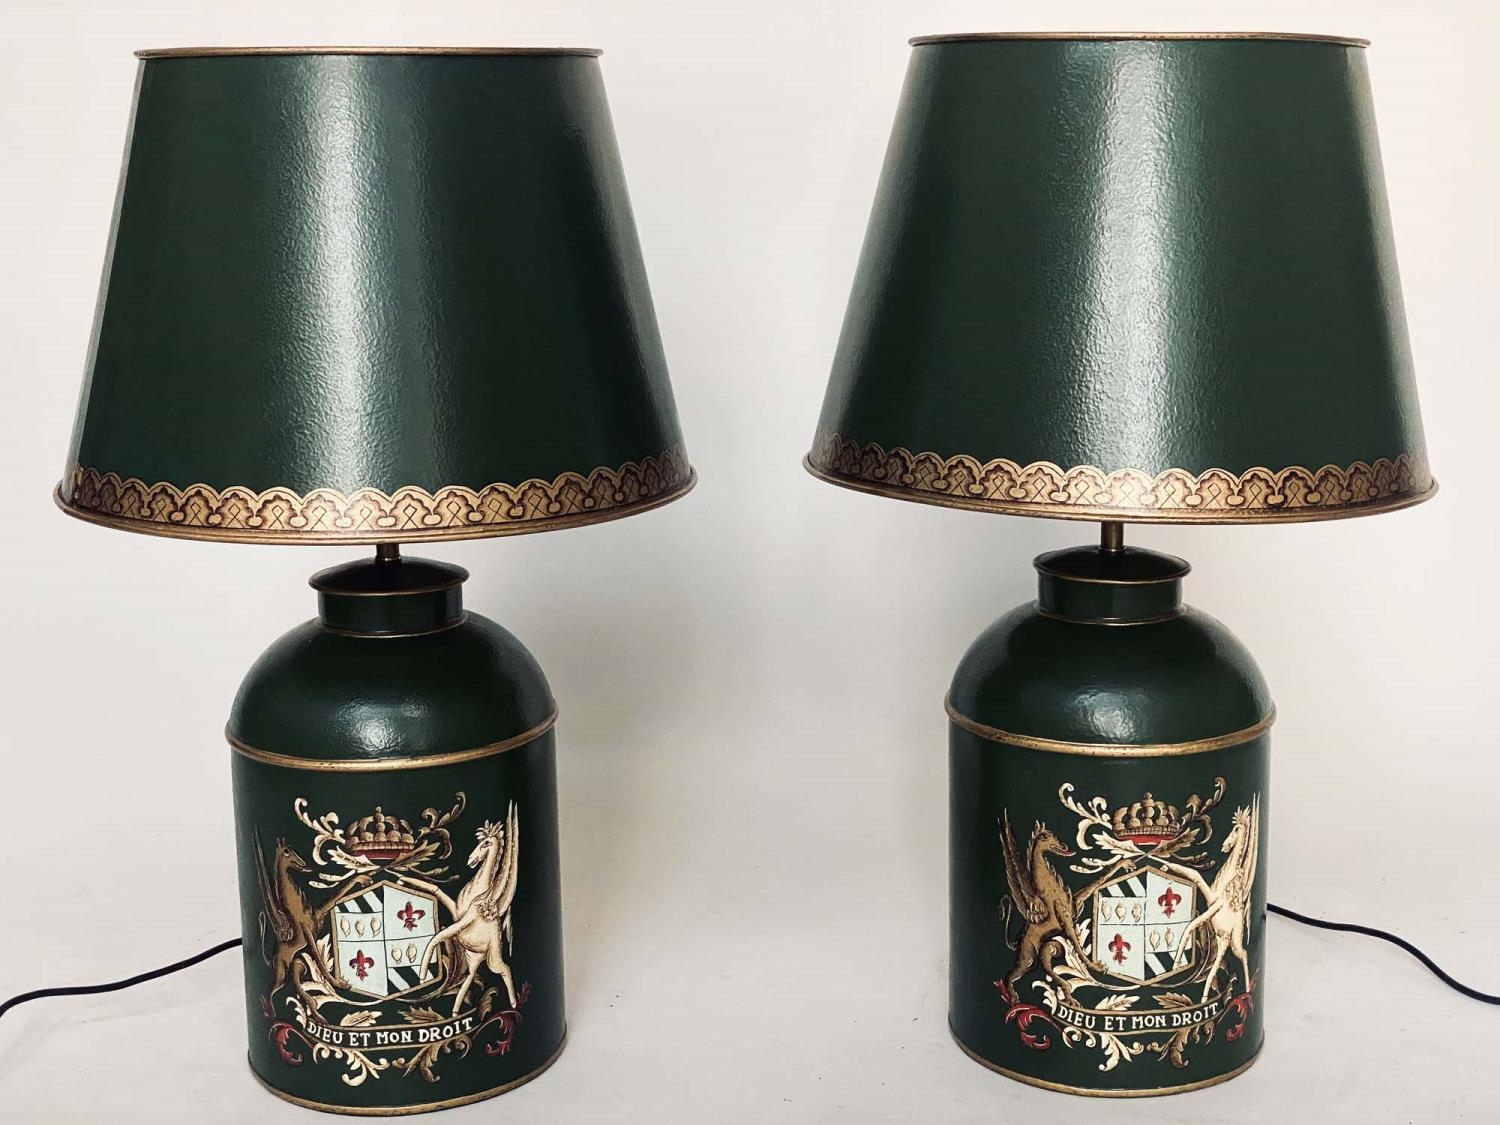 CANISTER LAMPS, a pair, antique style toleware, tea canister form each with royal coat of arms and - Image 3 of 5